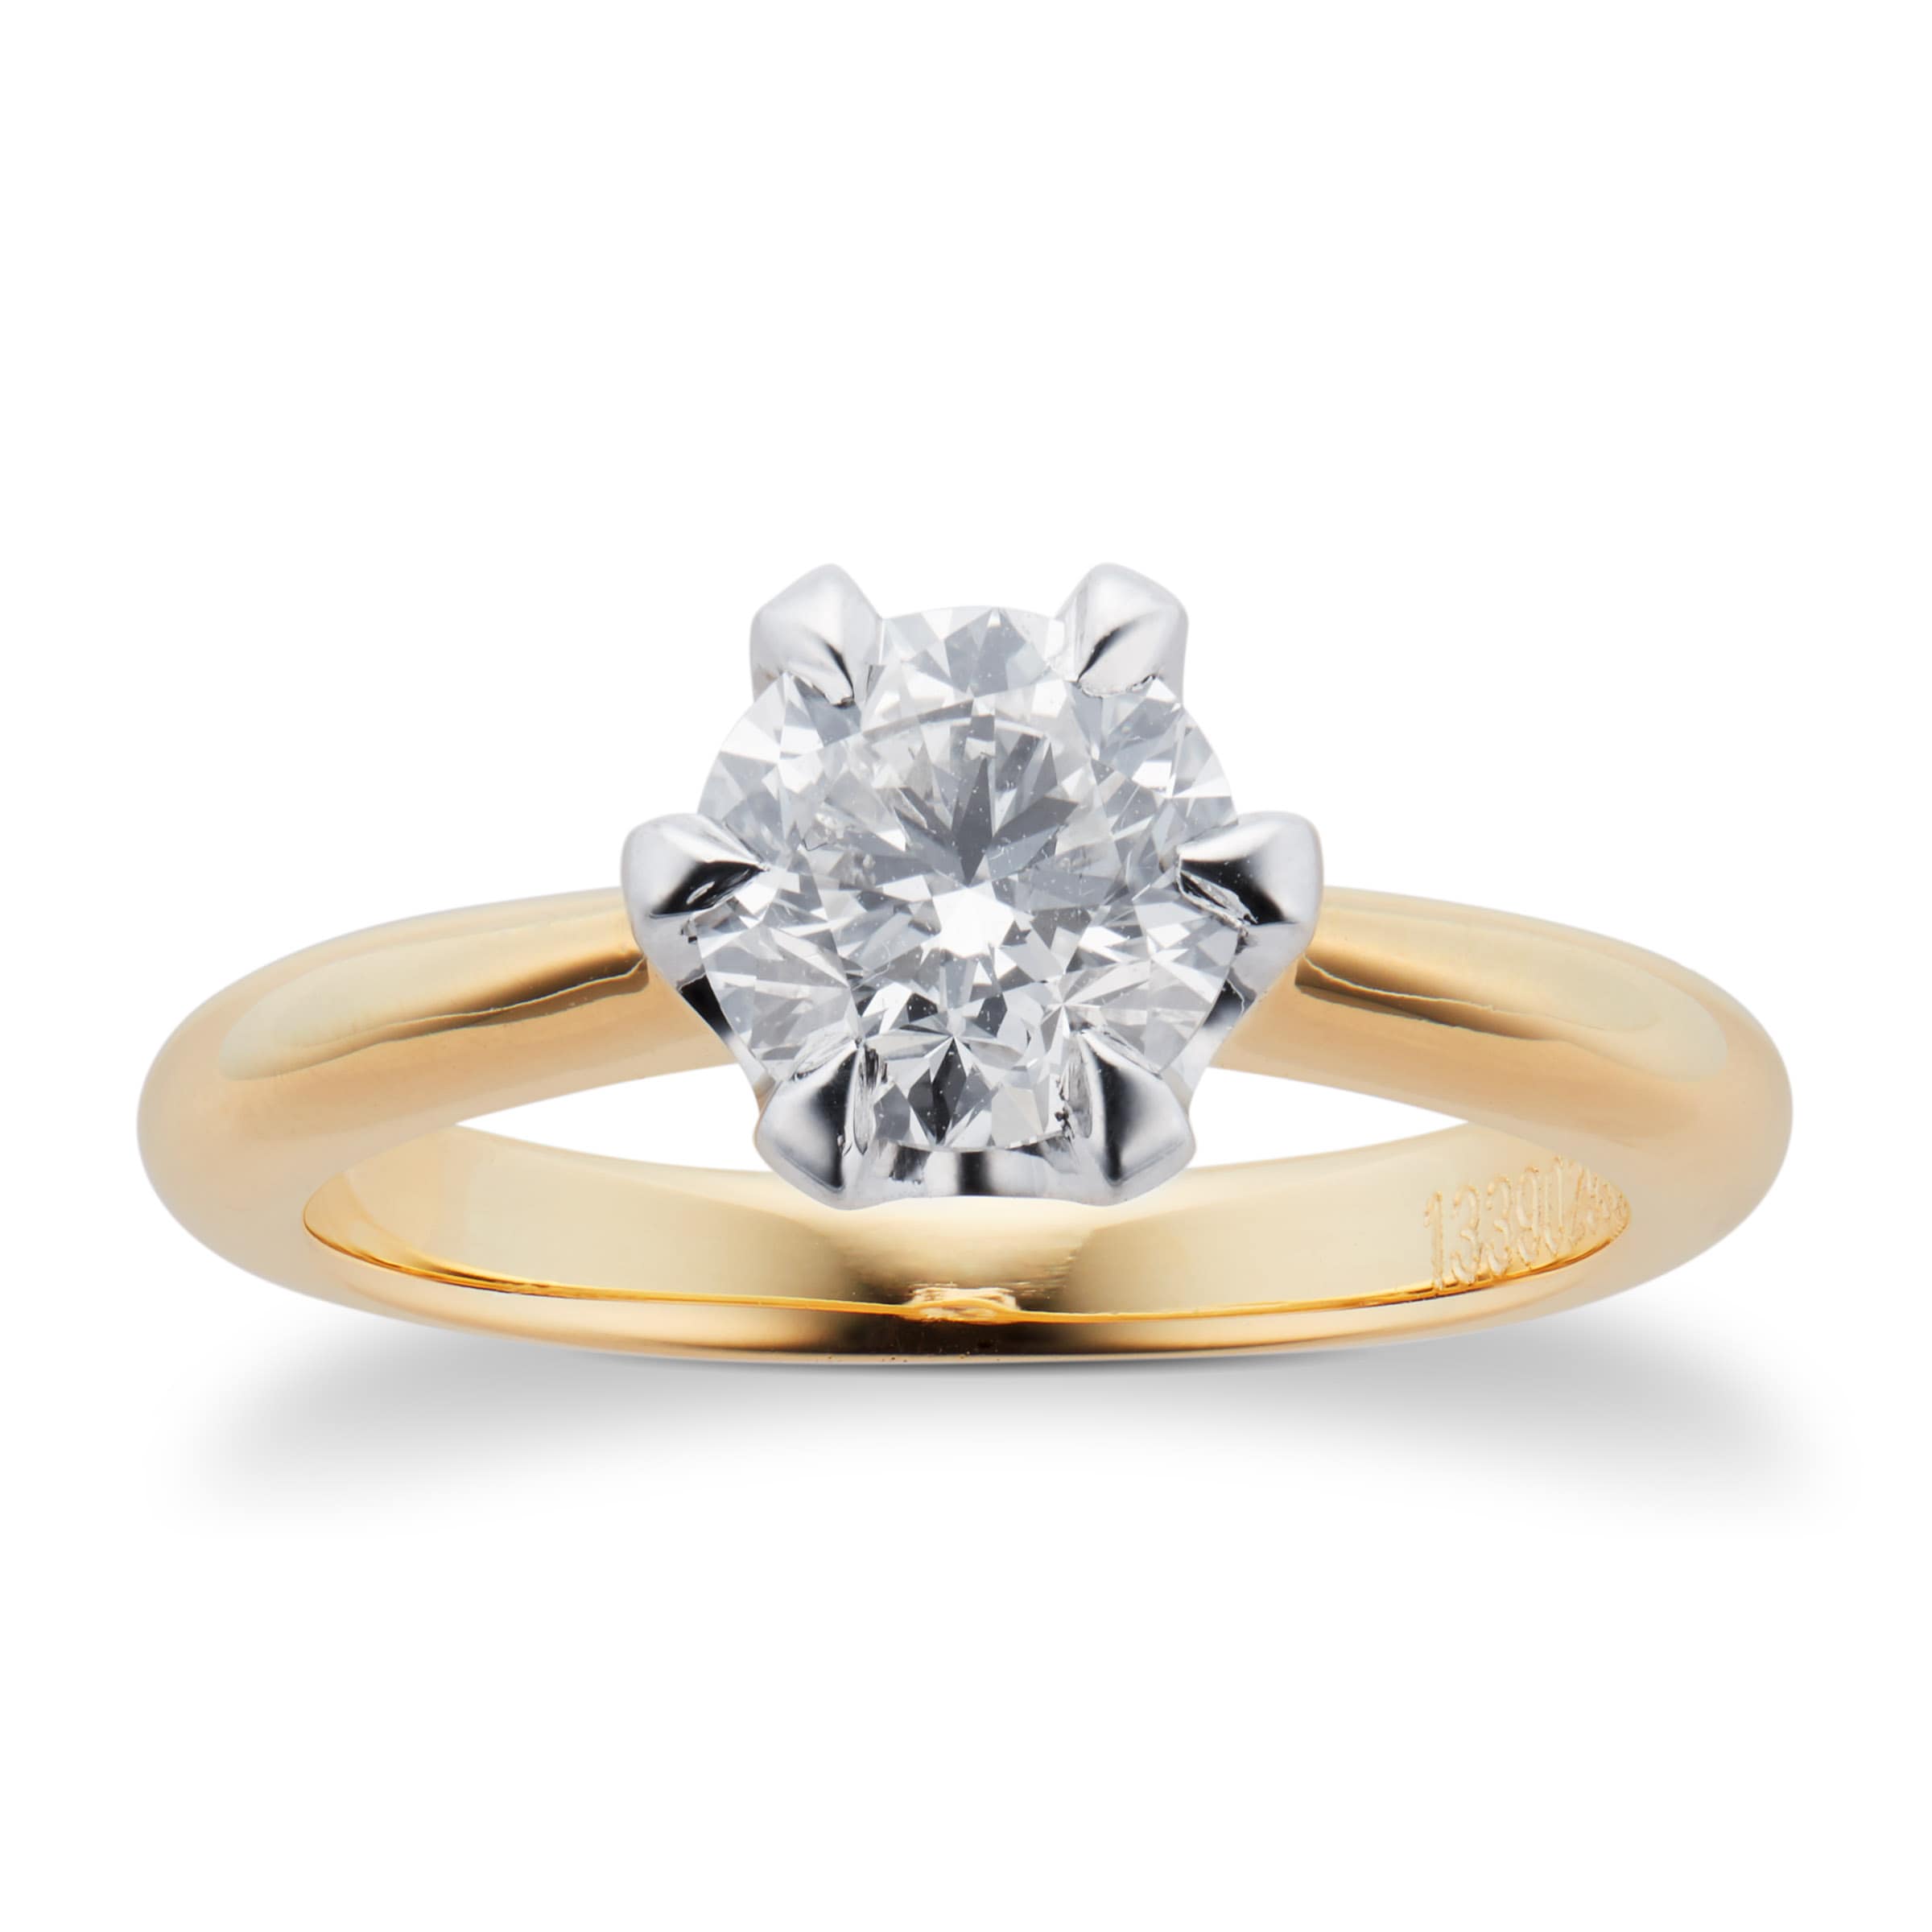 Hermione 18ct Yellow Gold 1.00ct Diamond Engagement Ring - Ring Size O